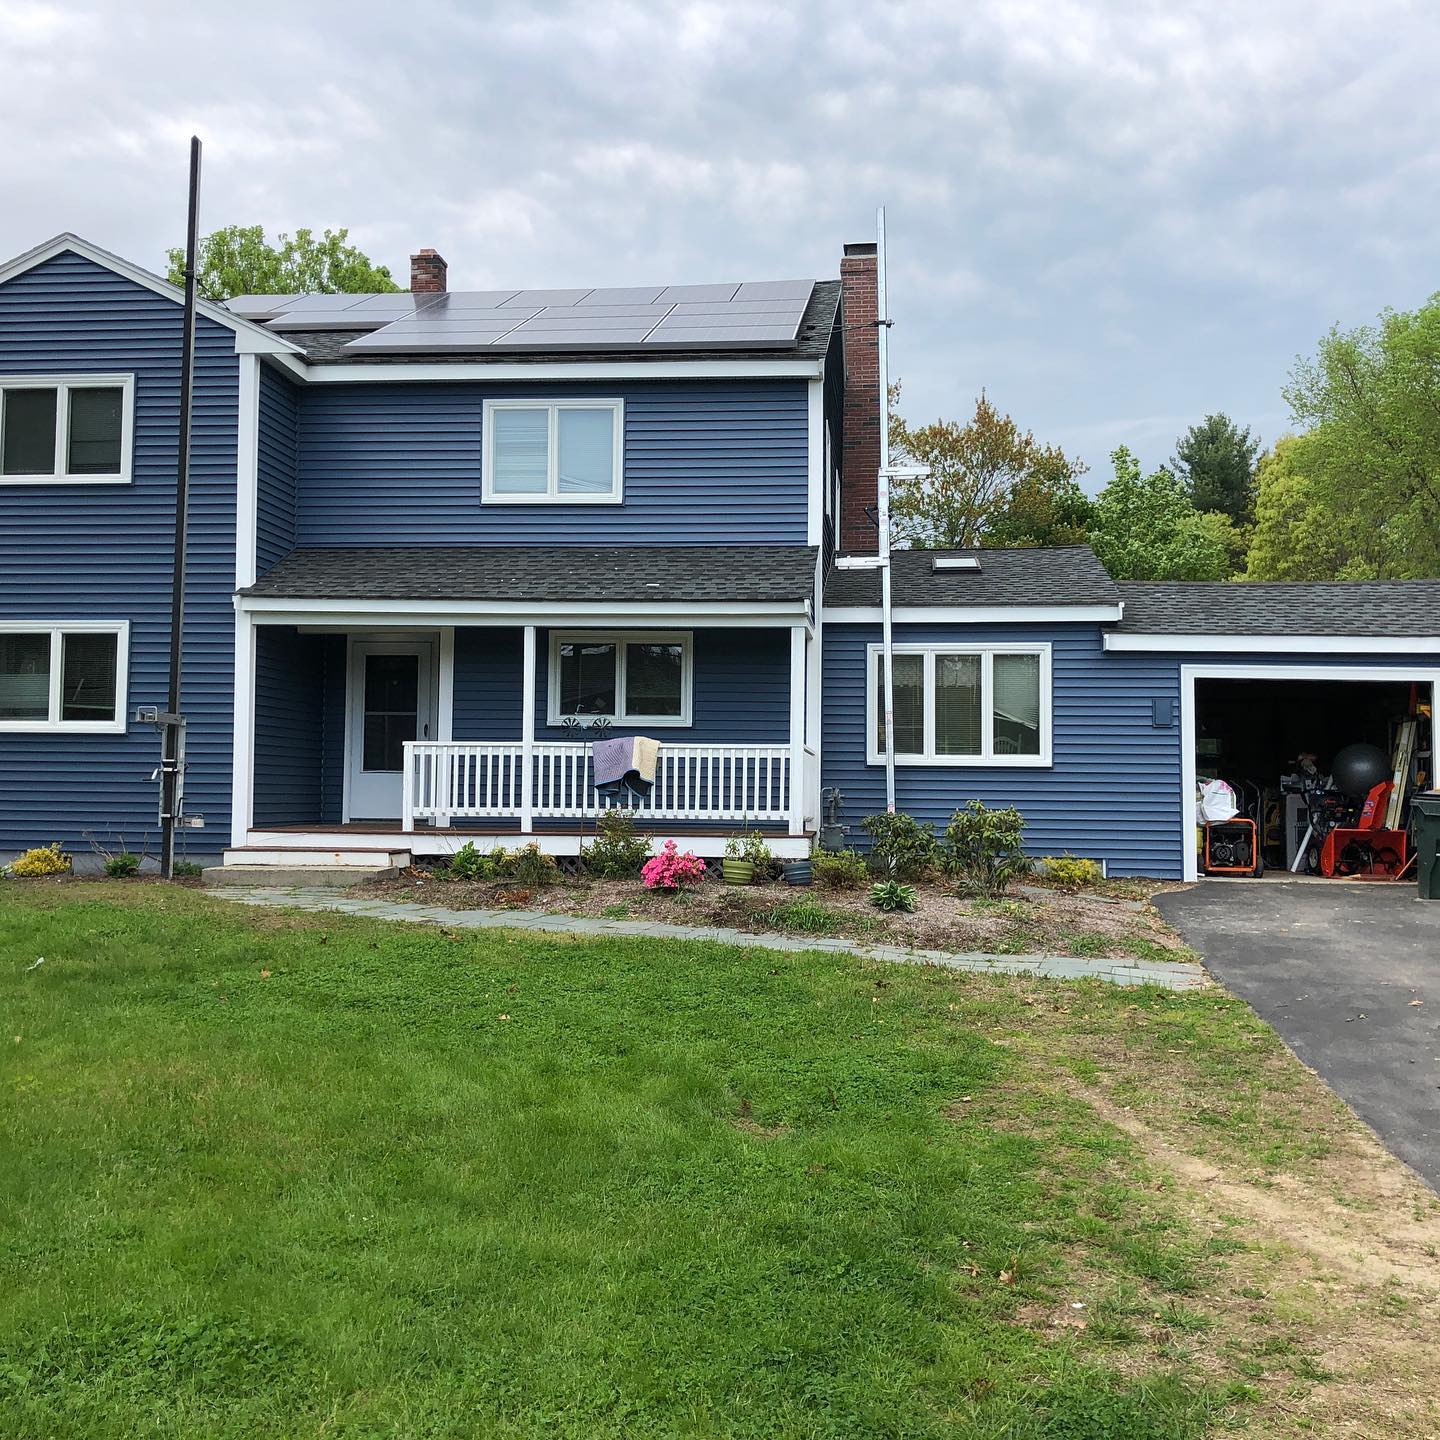 Elite Siding and Roofing 21 Cochituate Rd #2L, Wayland Massachusetts 01778